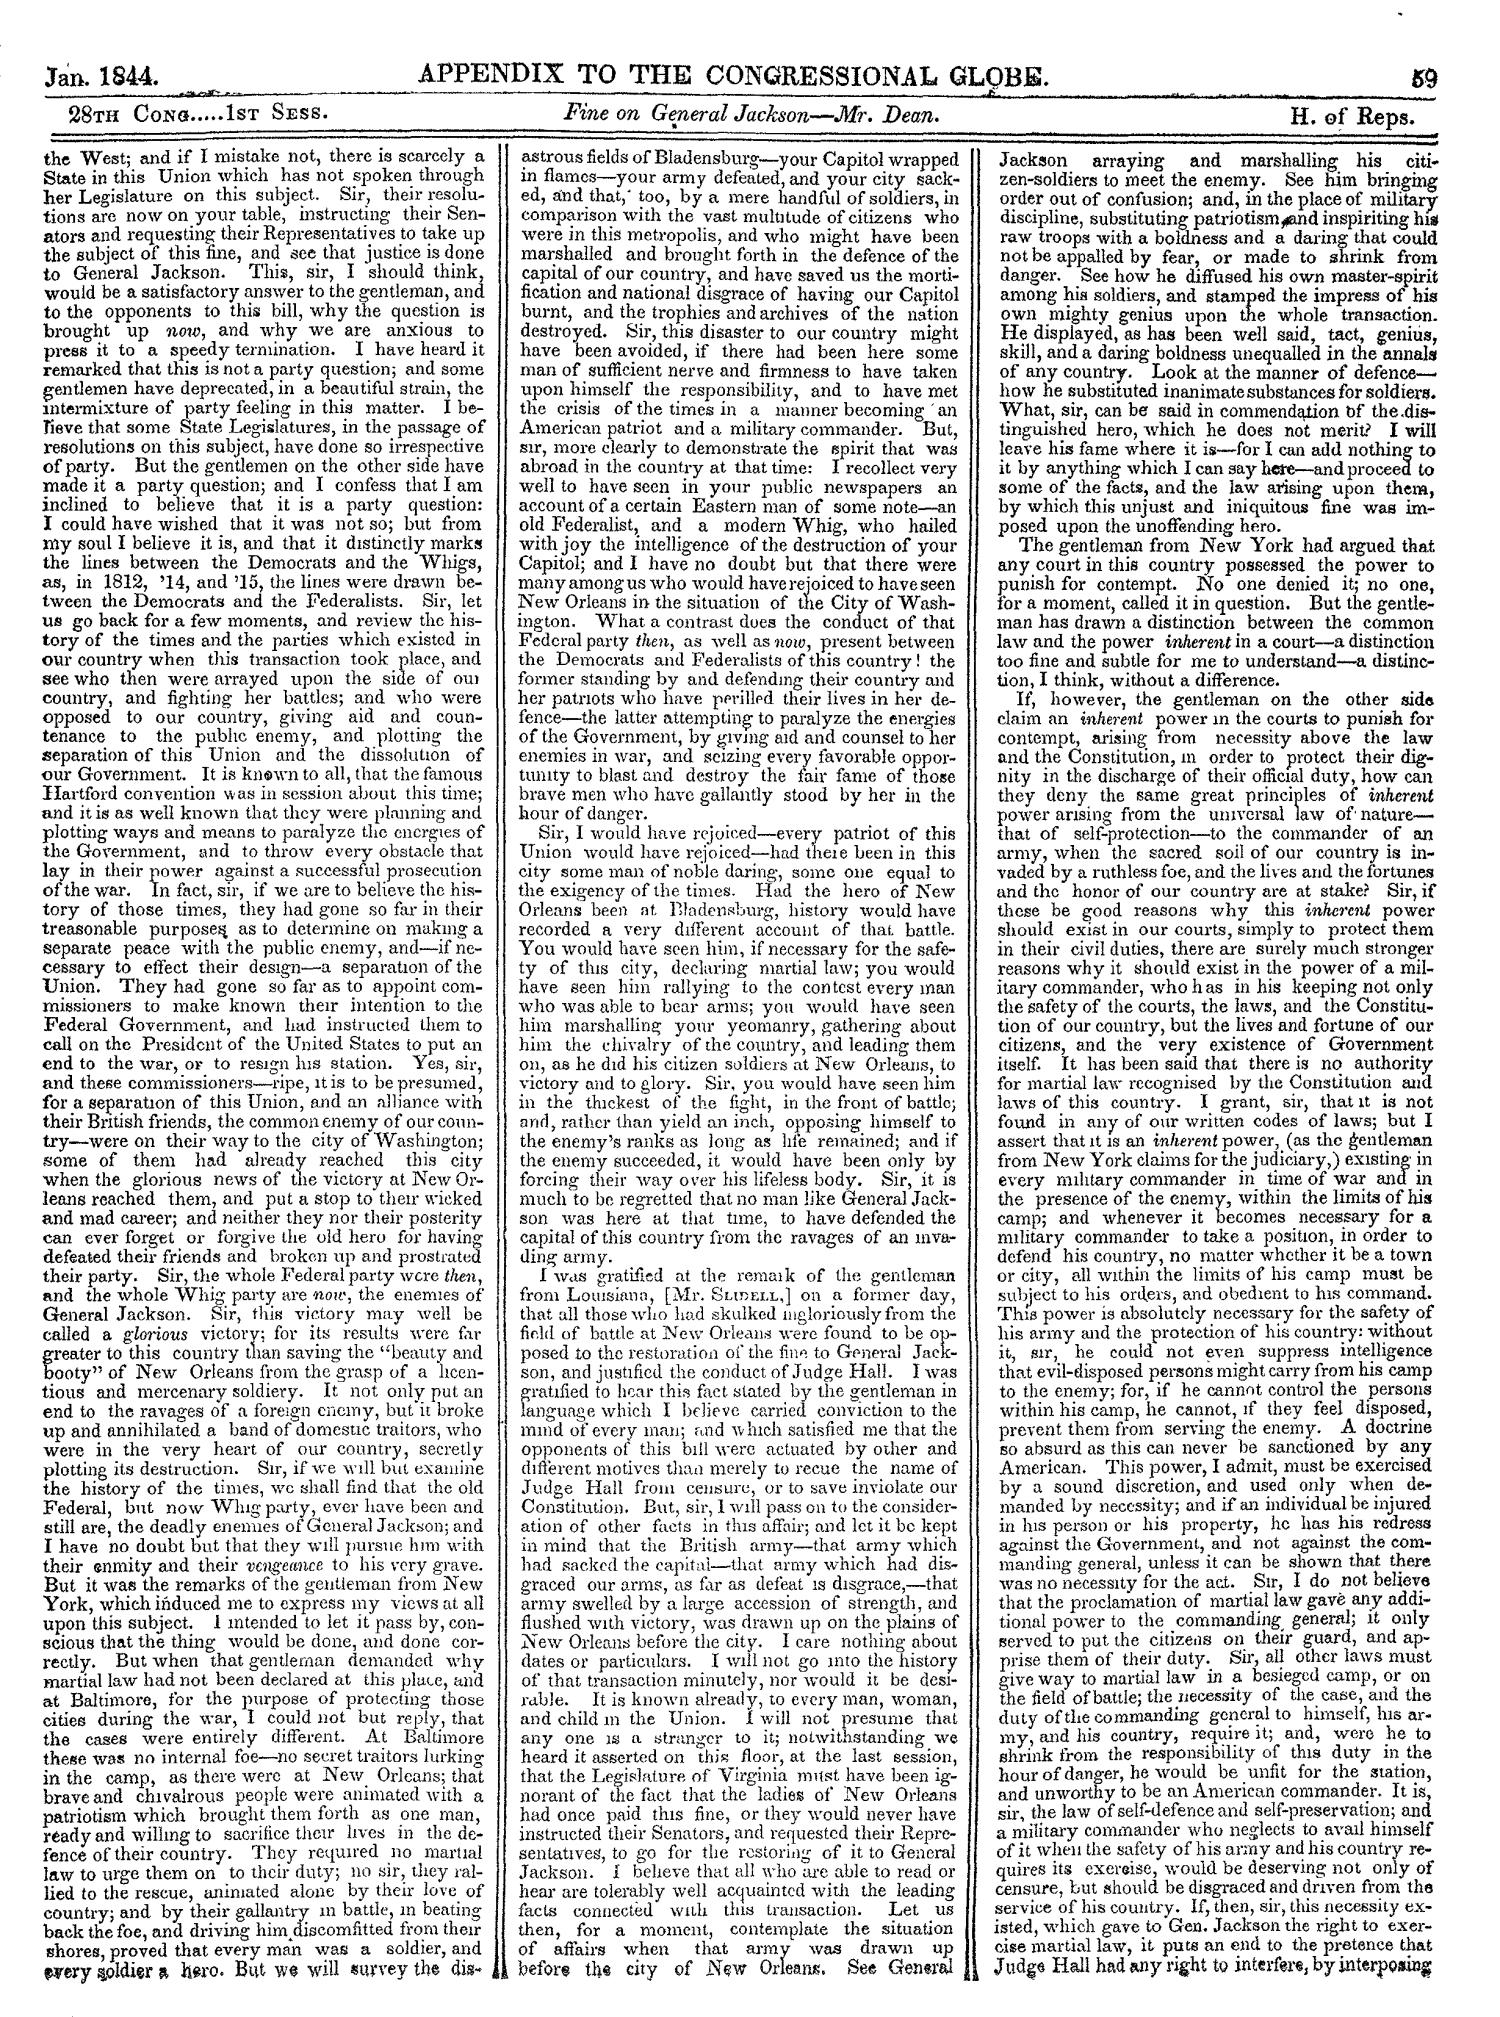 The Congressional Globe, Volume 13, Part 2: Twenty-Eighth Congress, First Session
                                                
                                                    59
                                                